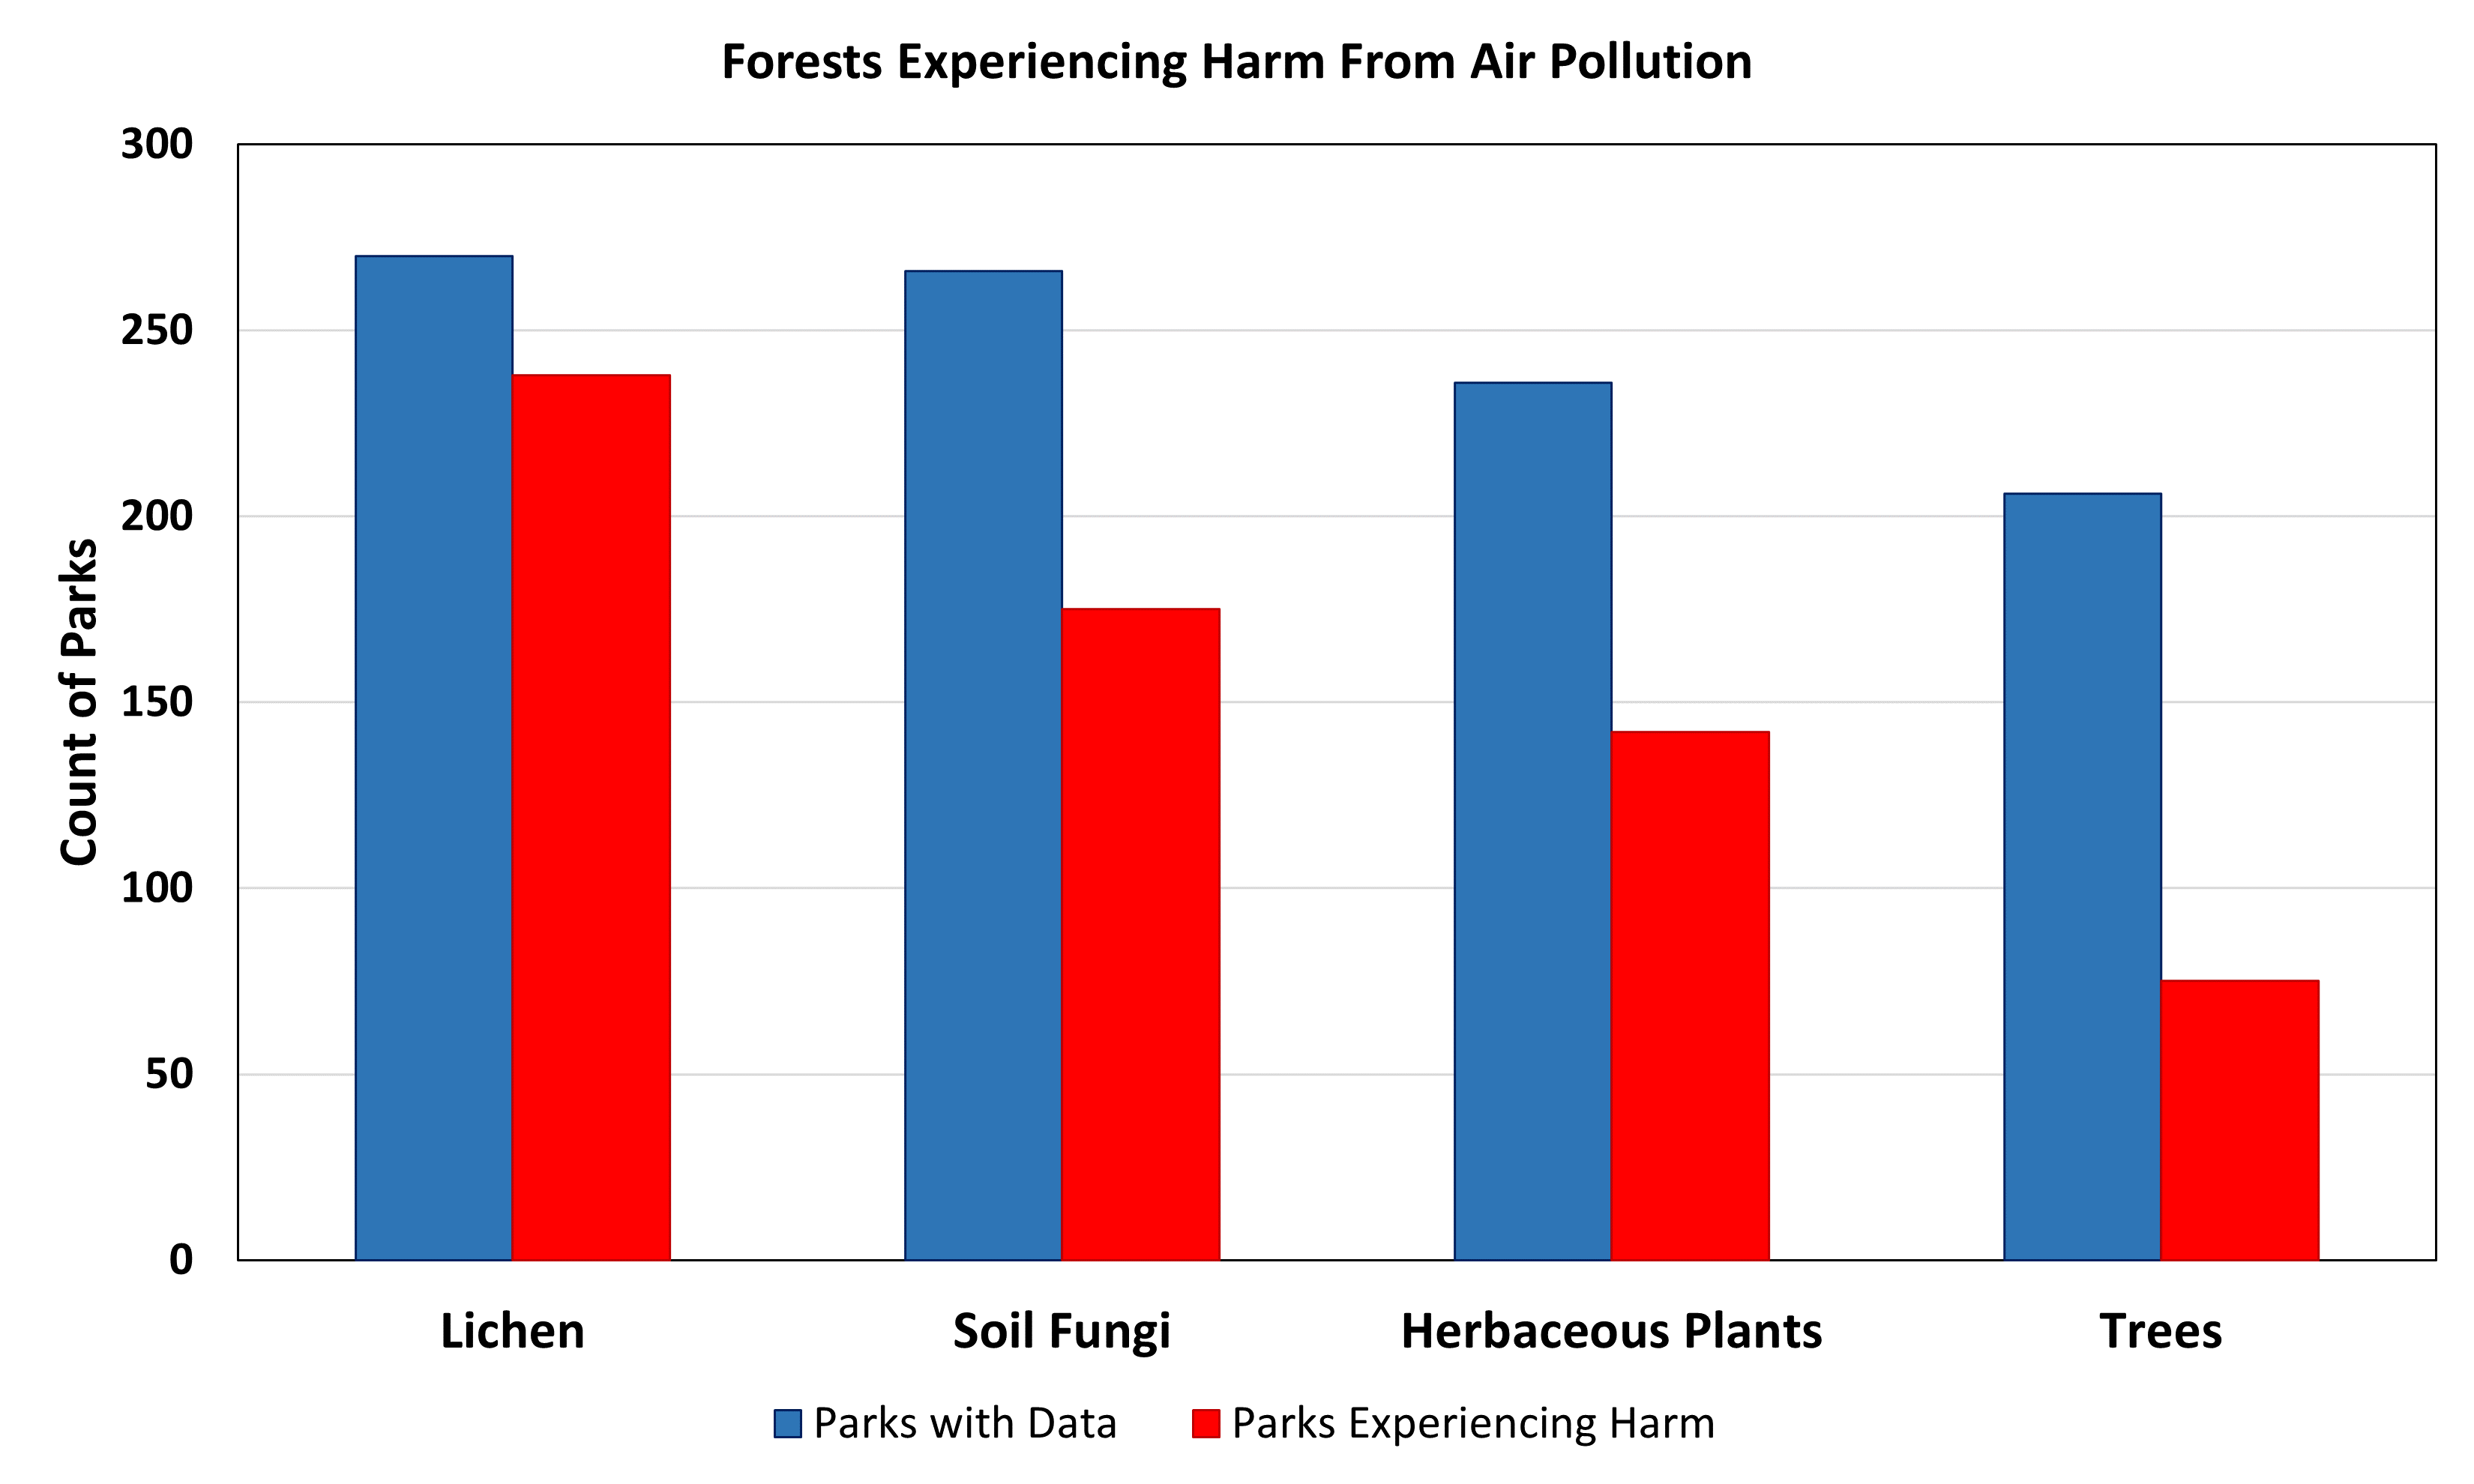 A bar chart showing the number of parks with data and the number of parks with forests experiencing harm.